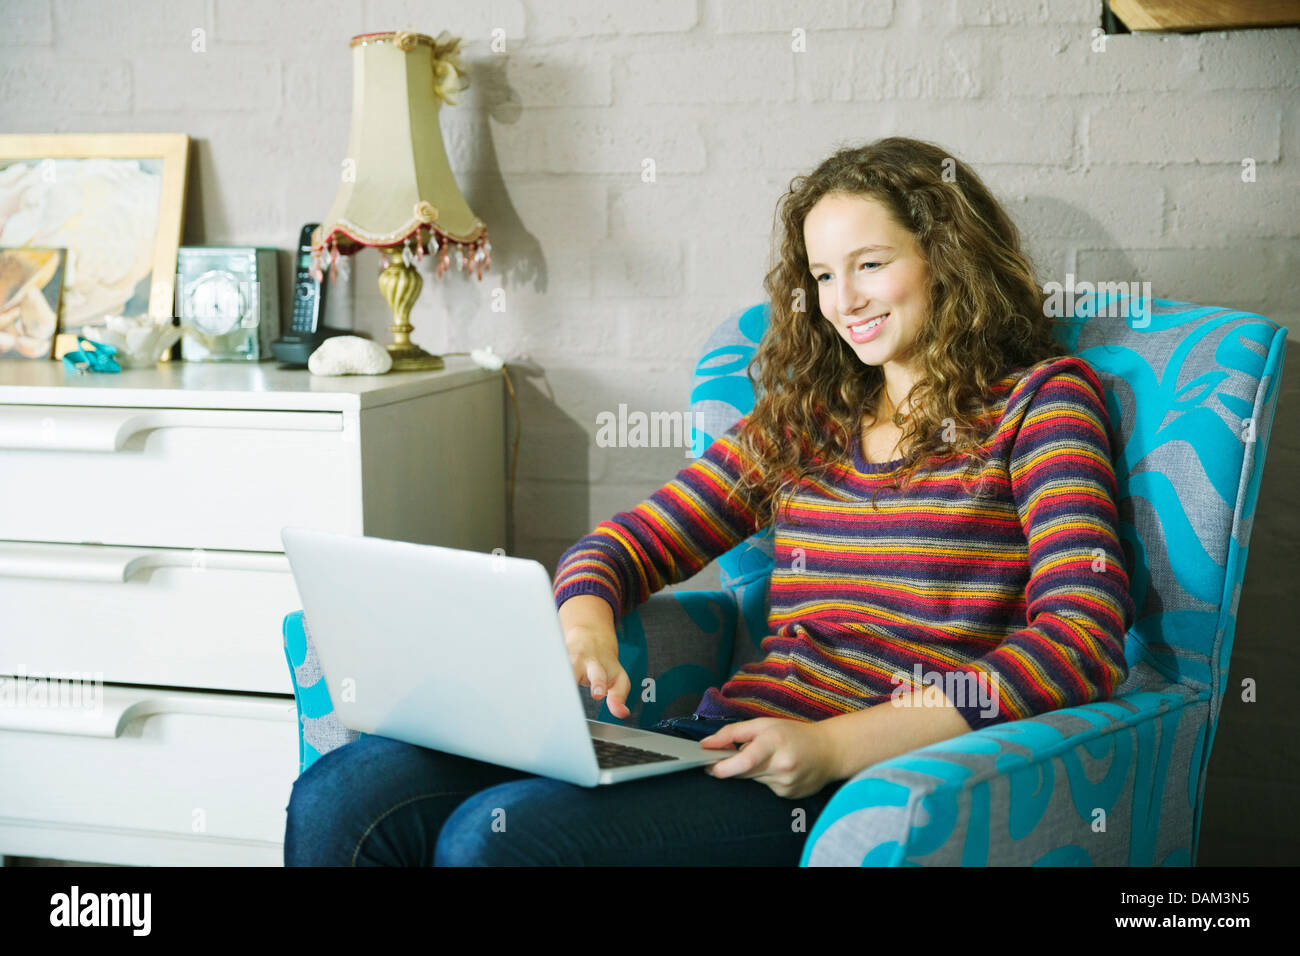 Woman using laptop in armchair Stock Photo